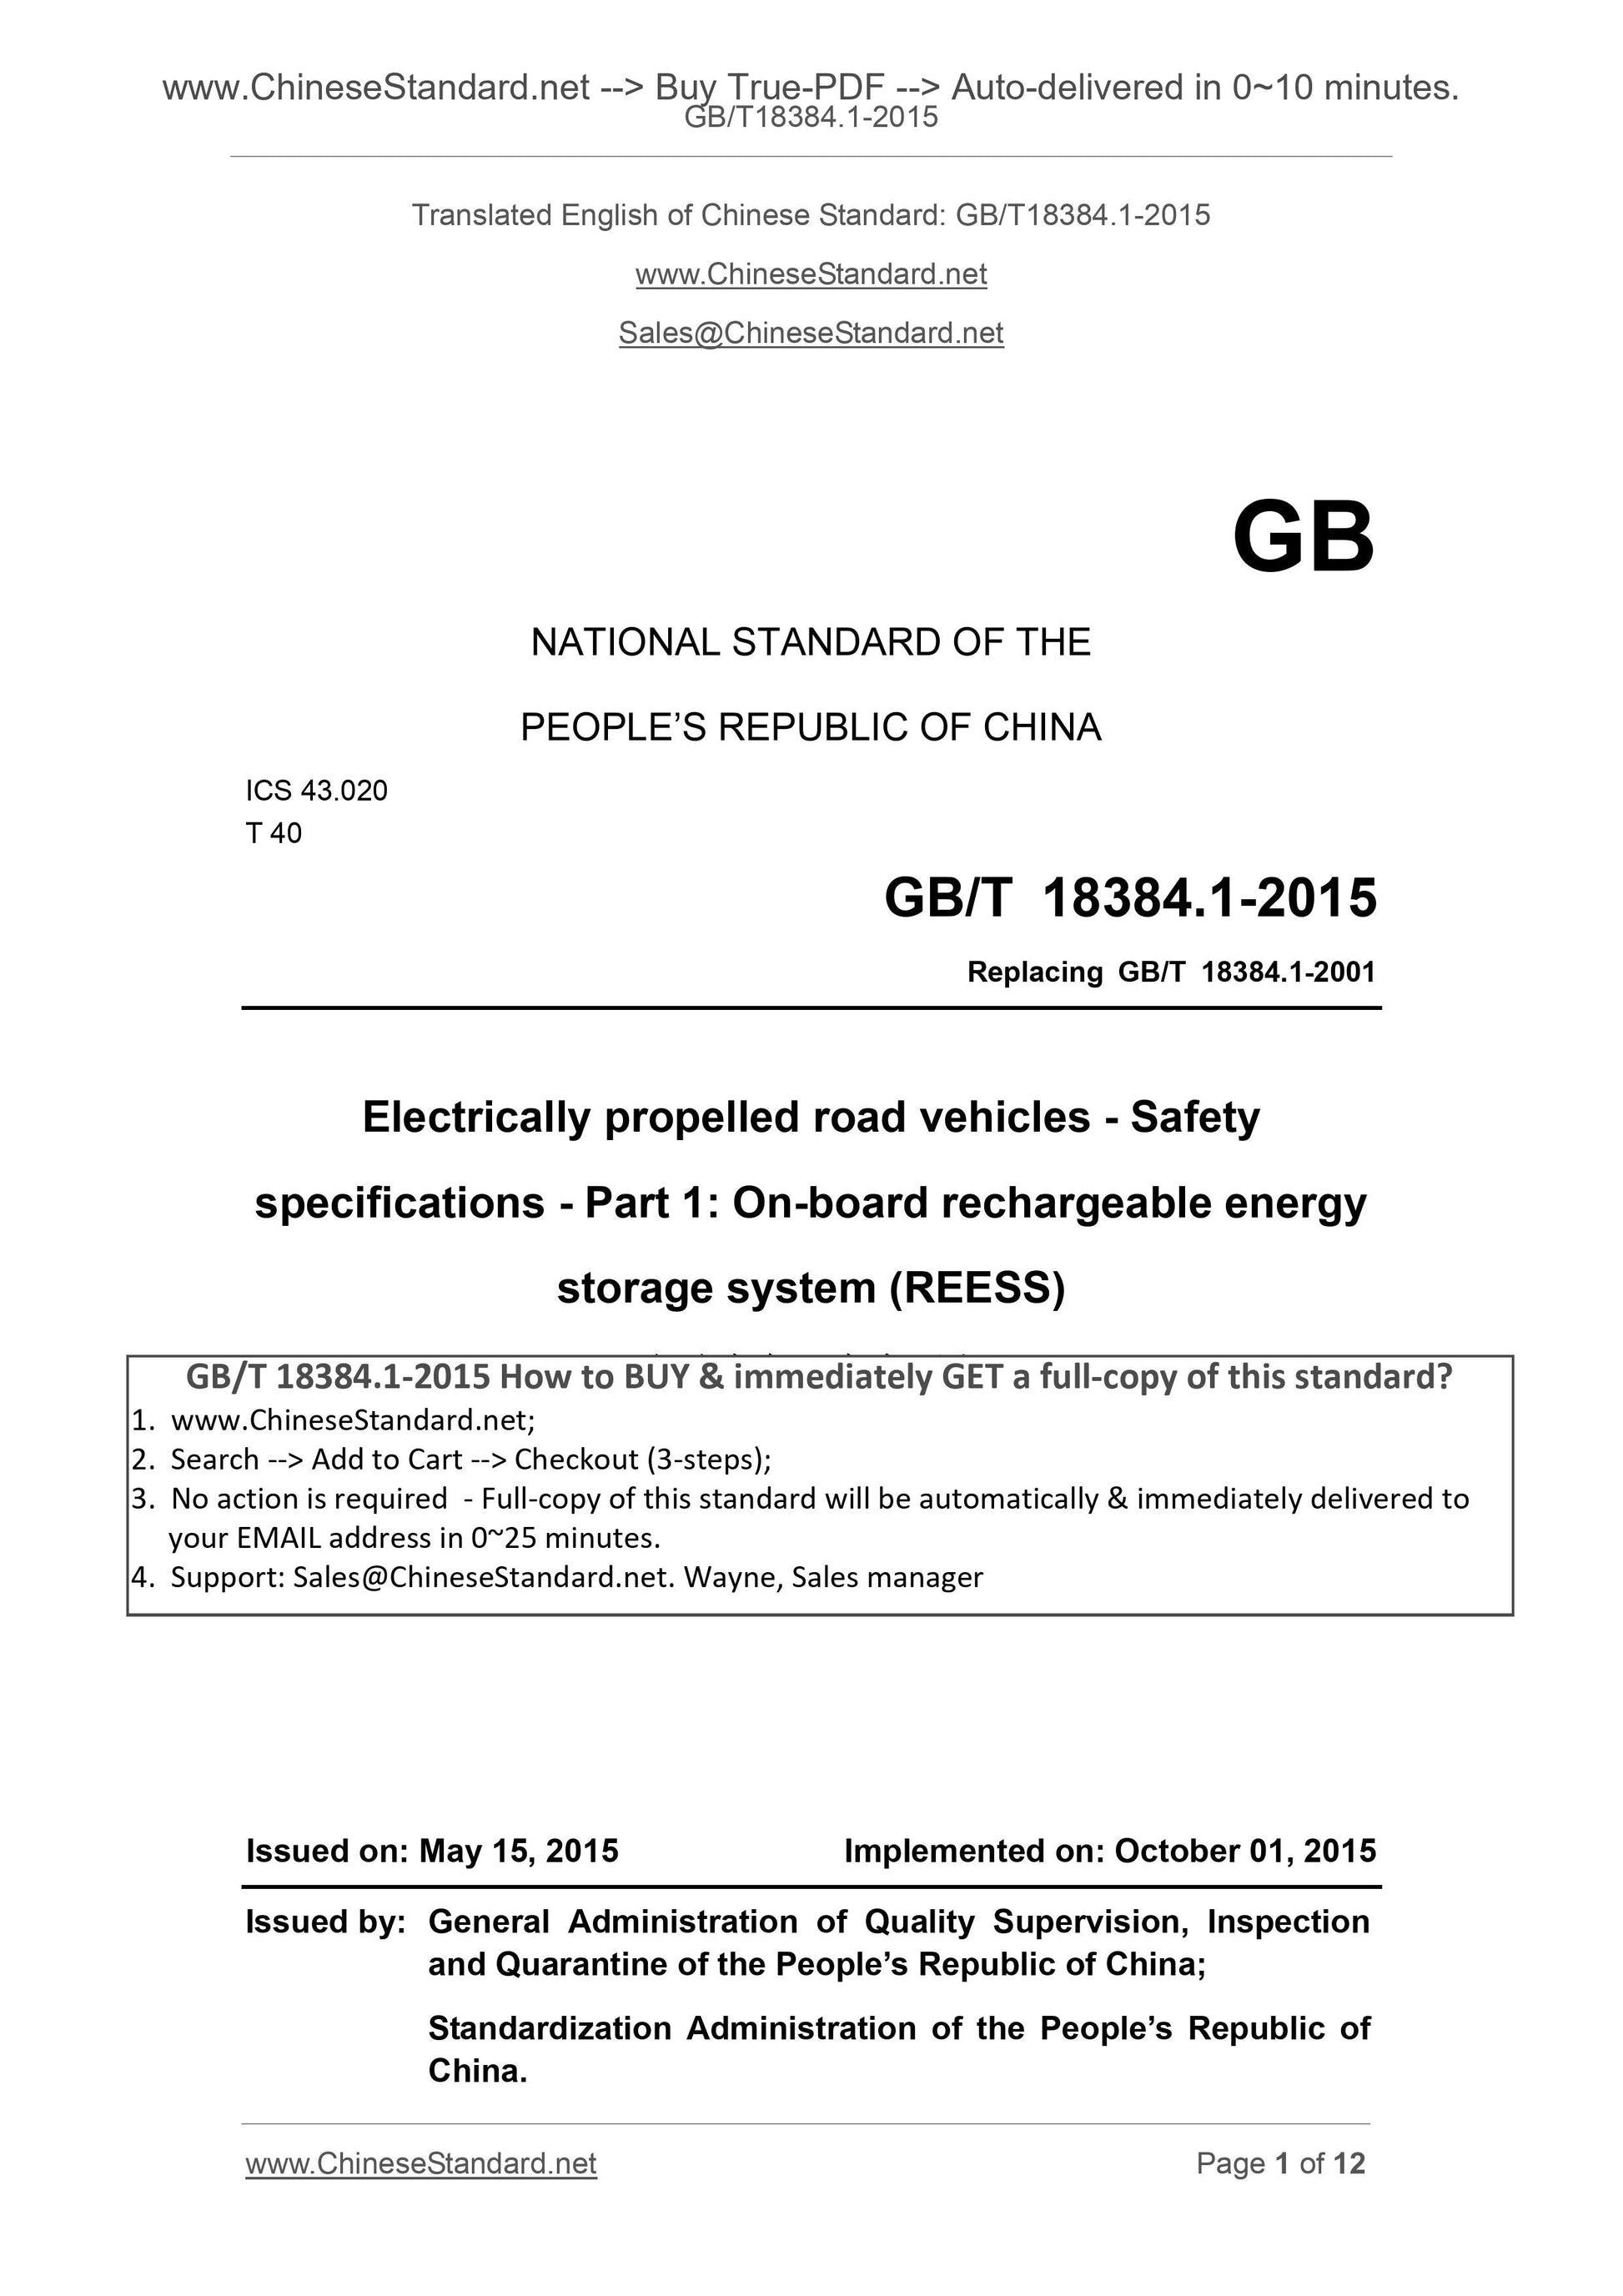 GB/T 18384.1-2015 Page 1